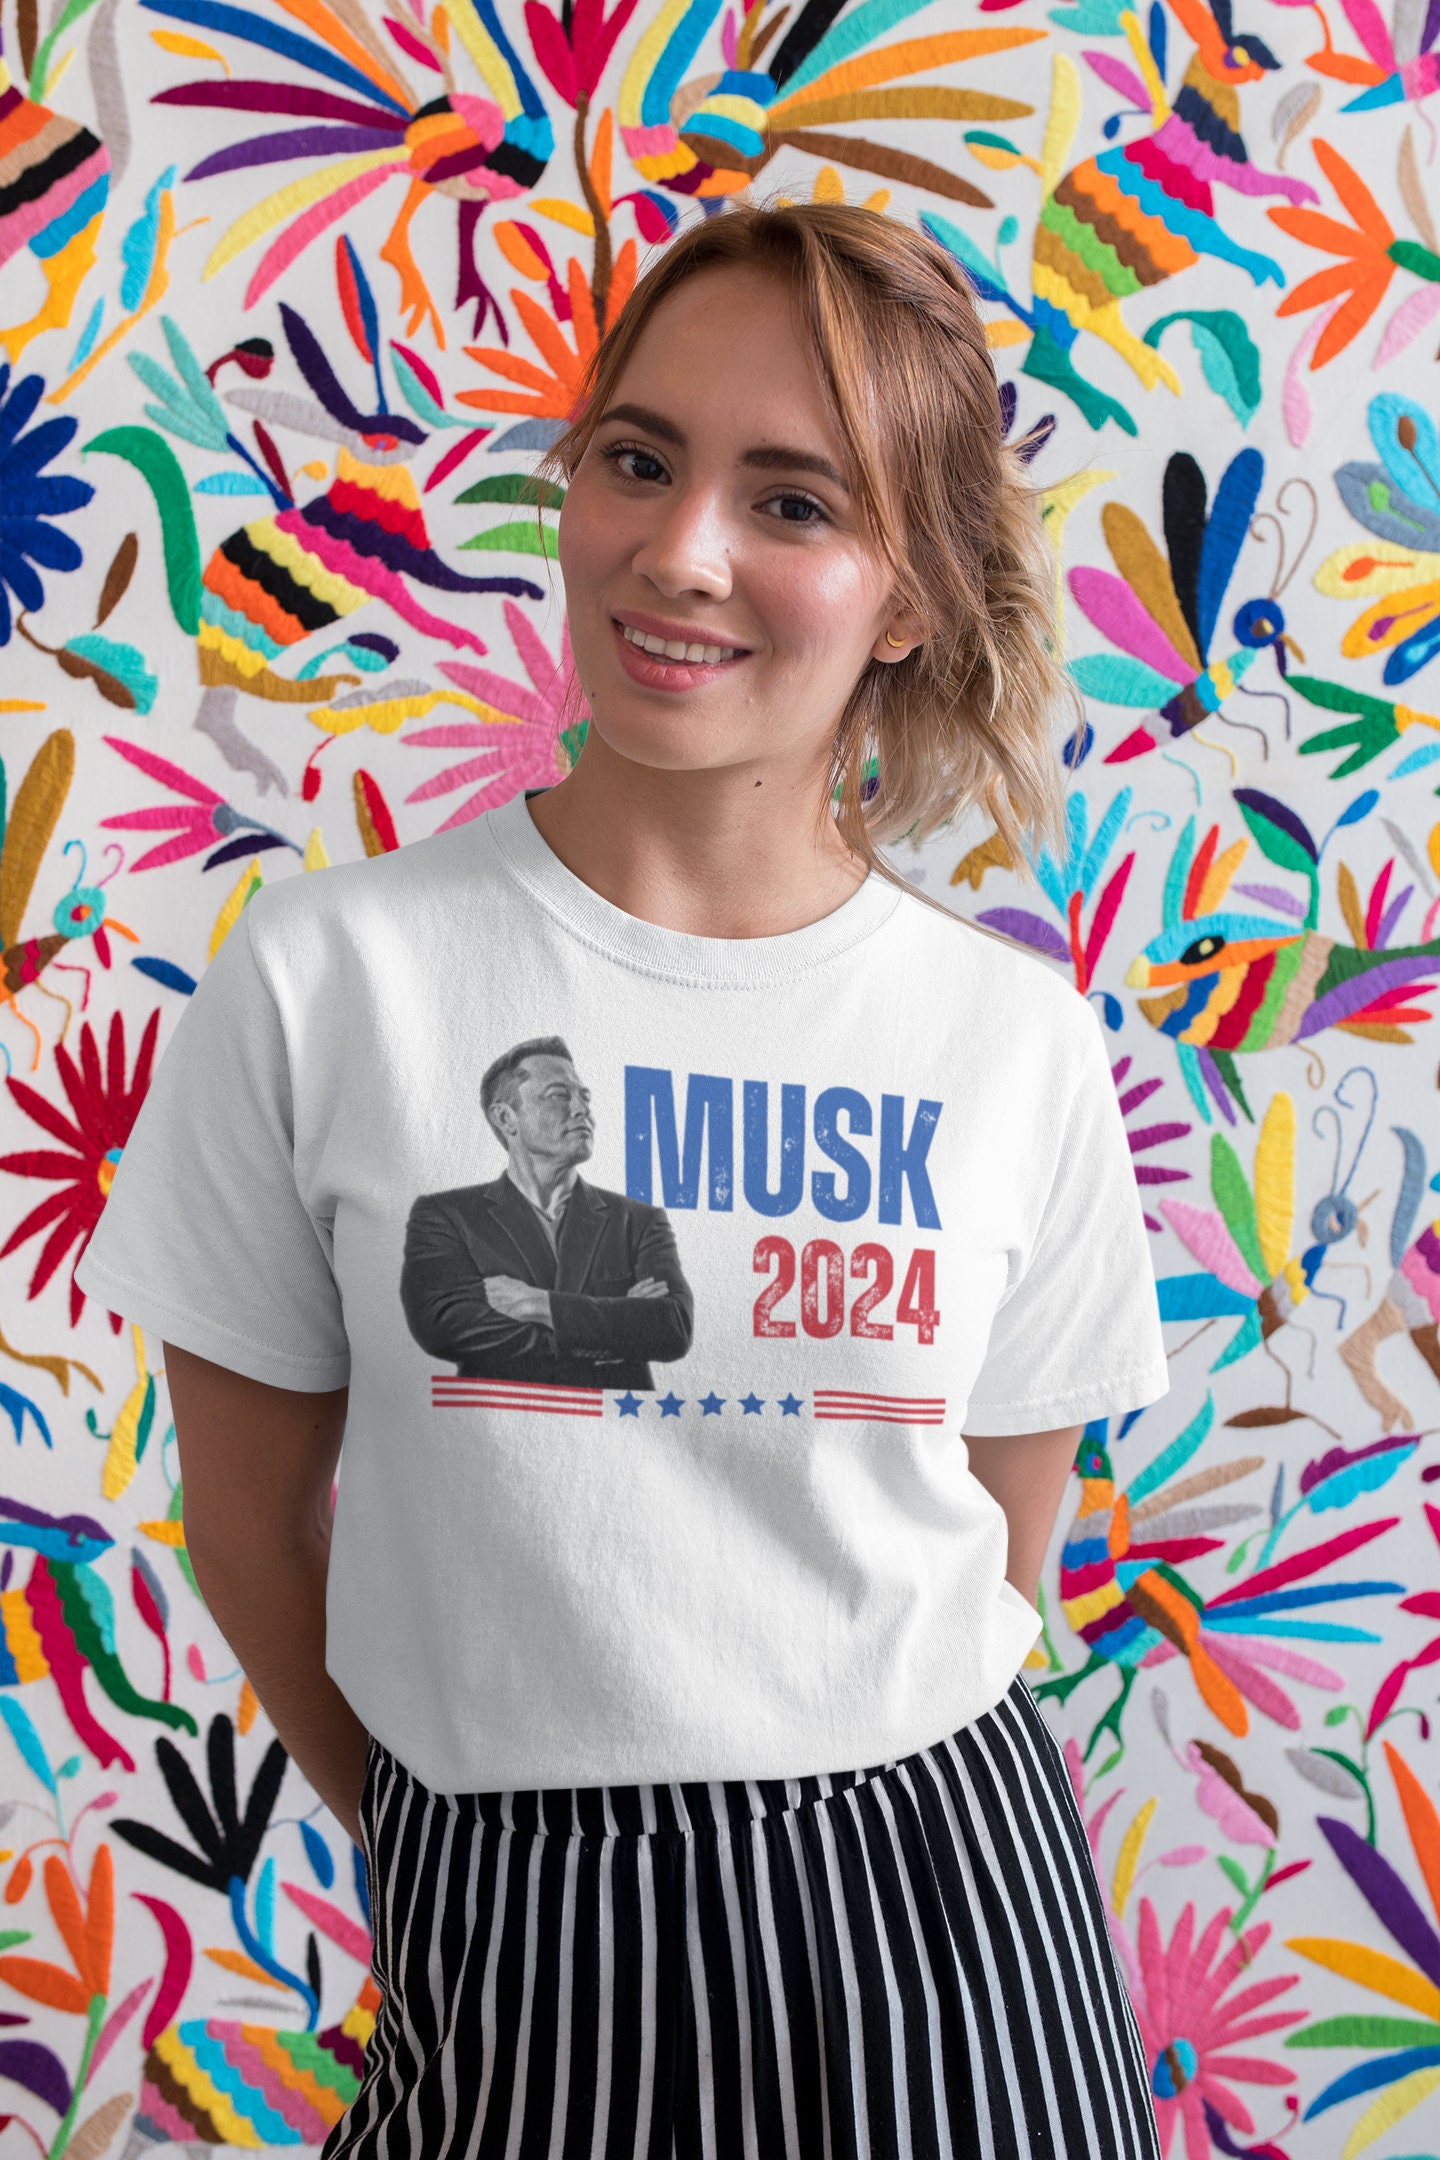 Discover Musk For President T-shirt | Elon 2024 shirt | Elon Musk election tee | Funny Gifts